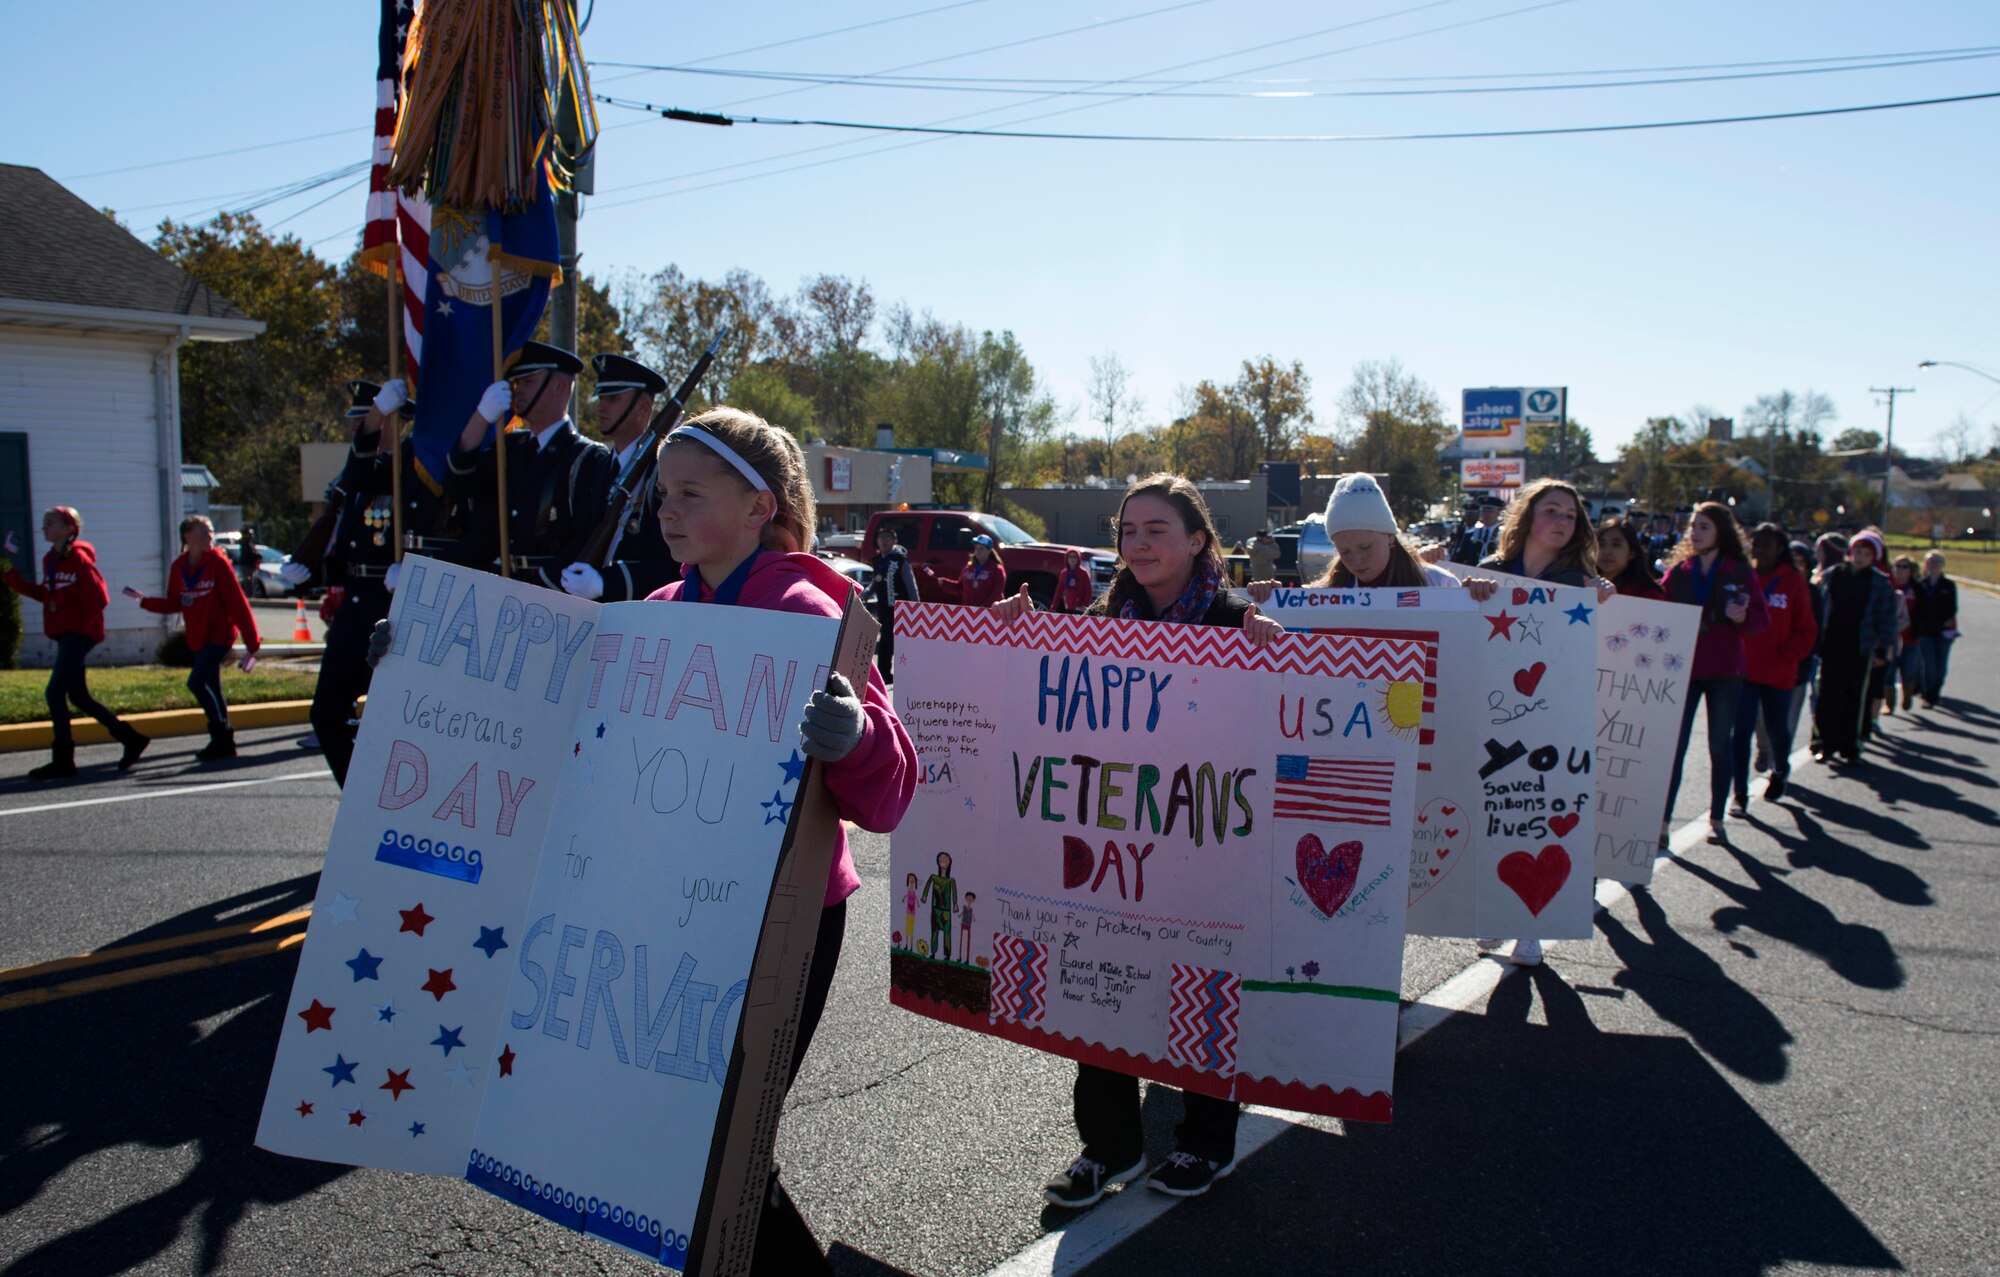 Children with signs and flags walked alongside the U.S. Air Force Honor Guard as they march in the 4th Annual Veterans Day Parade in Laurel, Del., Nov. 12, 2016. Laurel is a small city with a population of approximately 3,700, most taking part in the parade. (U.S. Air Force photo by Senior Airman Philip Bryant)